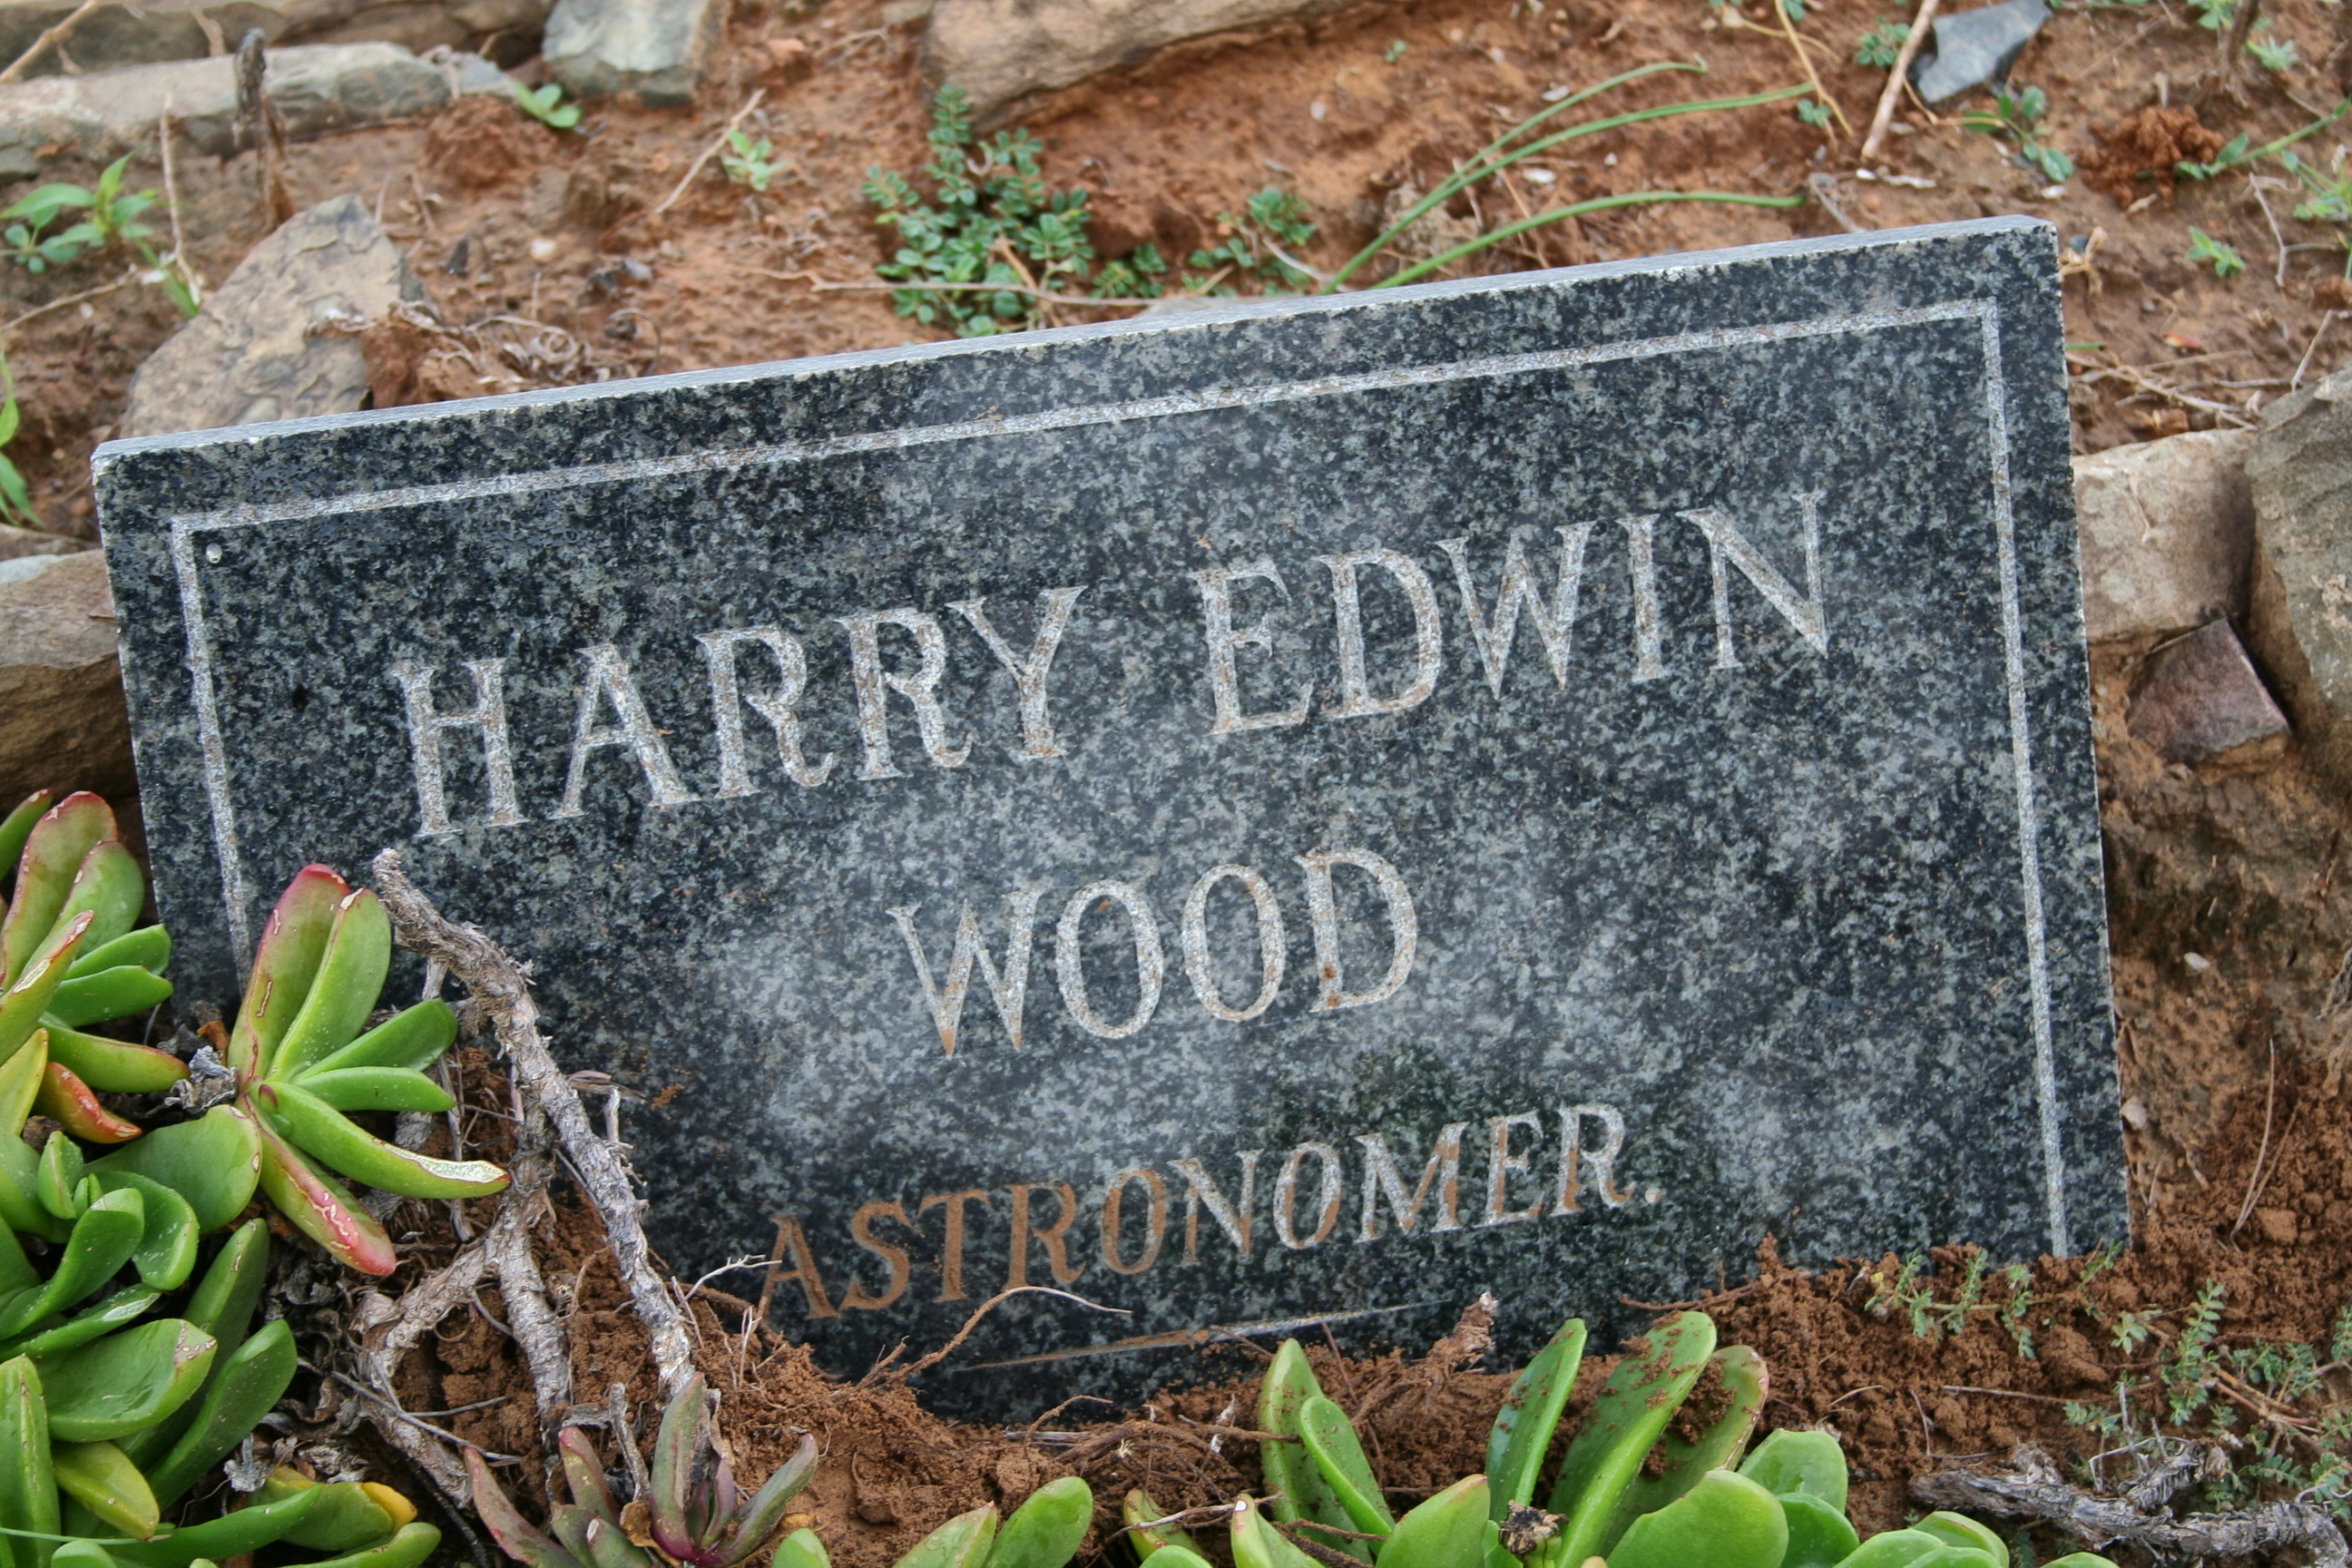 The stone of Harry Wood, who was once the official Timekeeper of the Union of South Africa. Image: Chris Marais